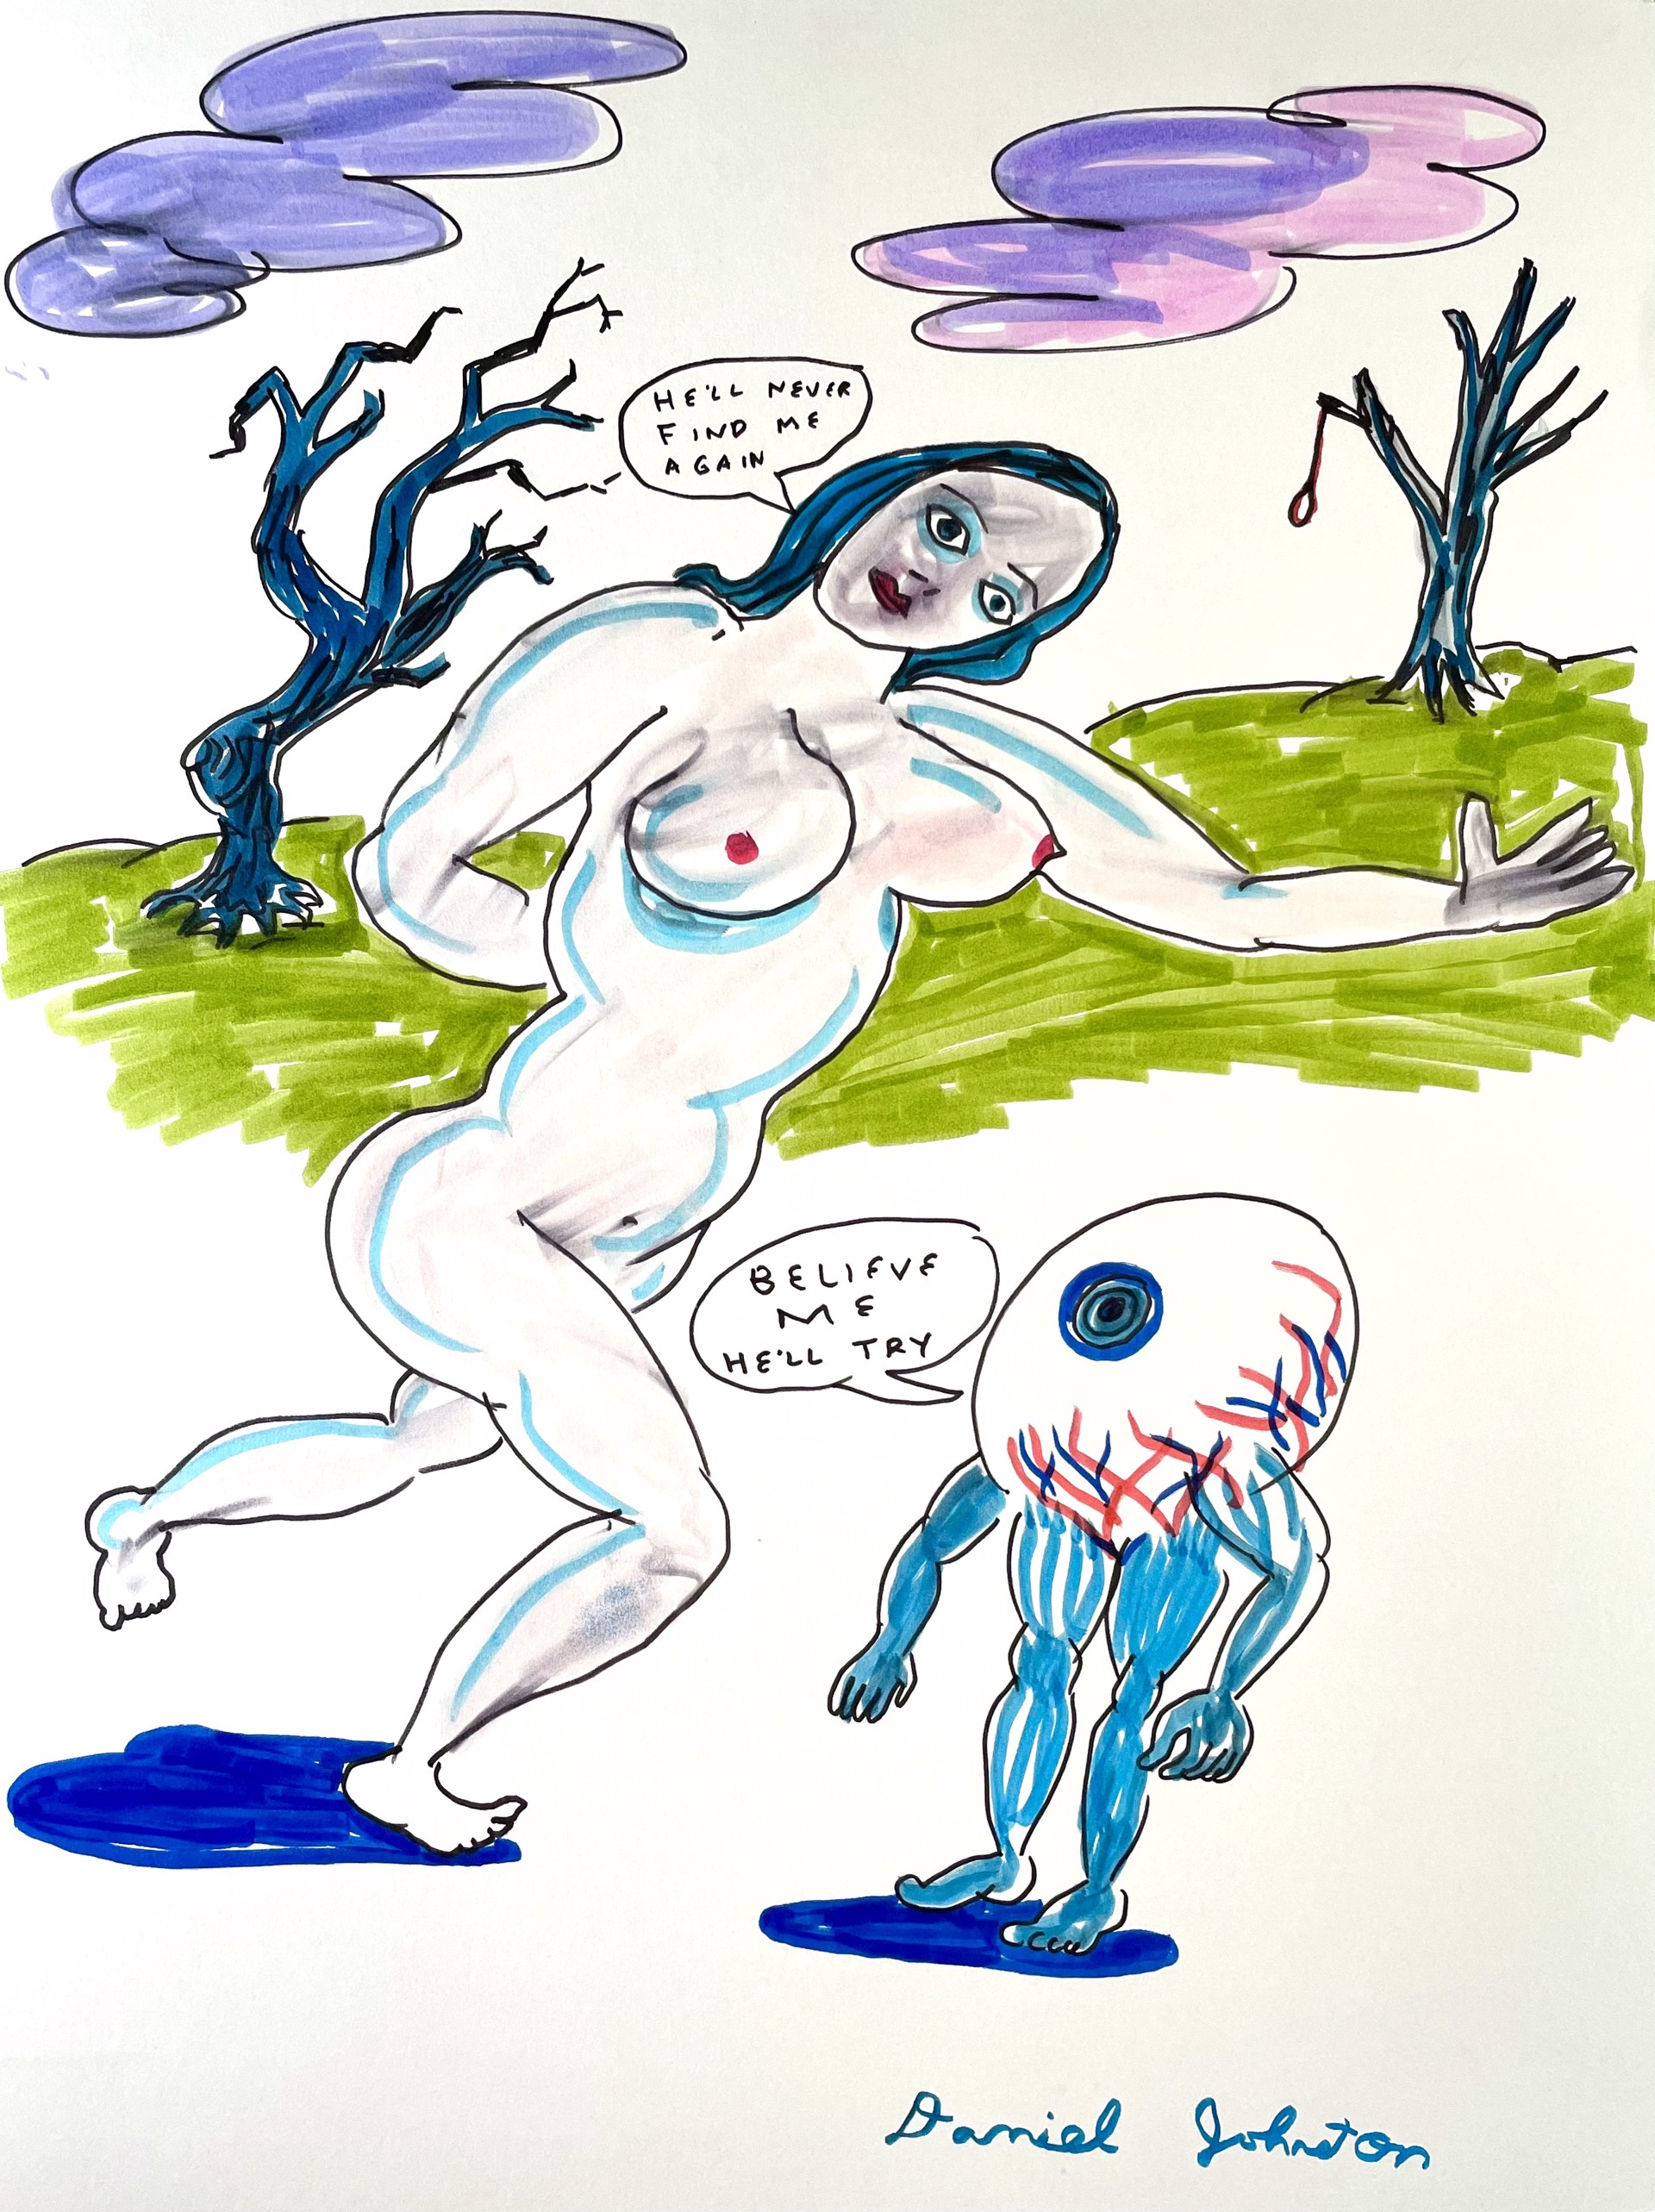 He'll Never Find Me by Daniel Johnston